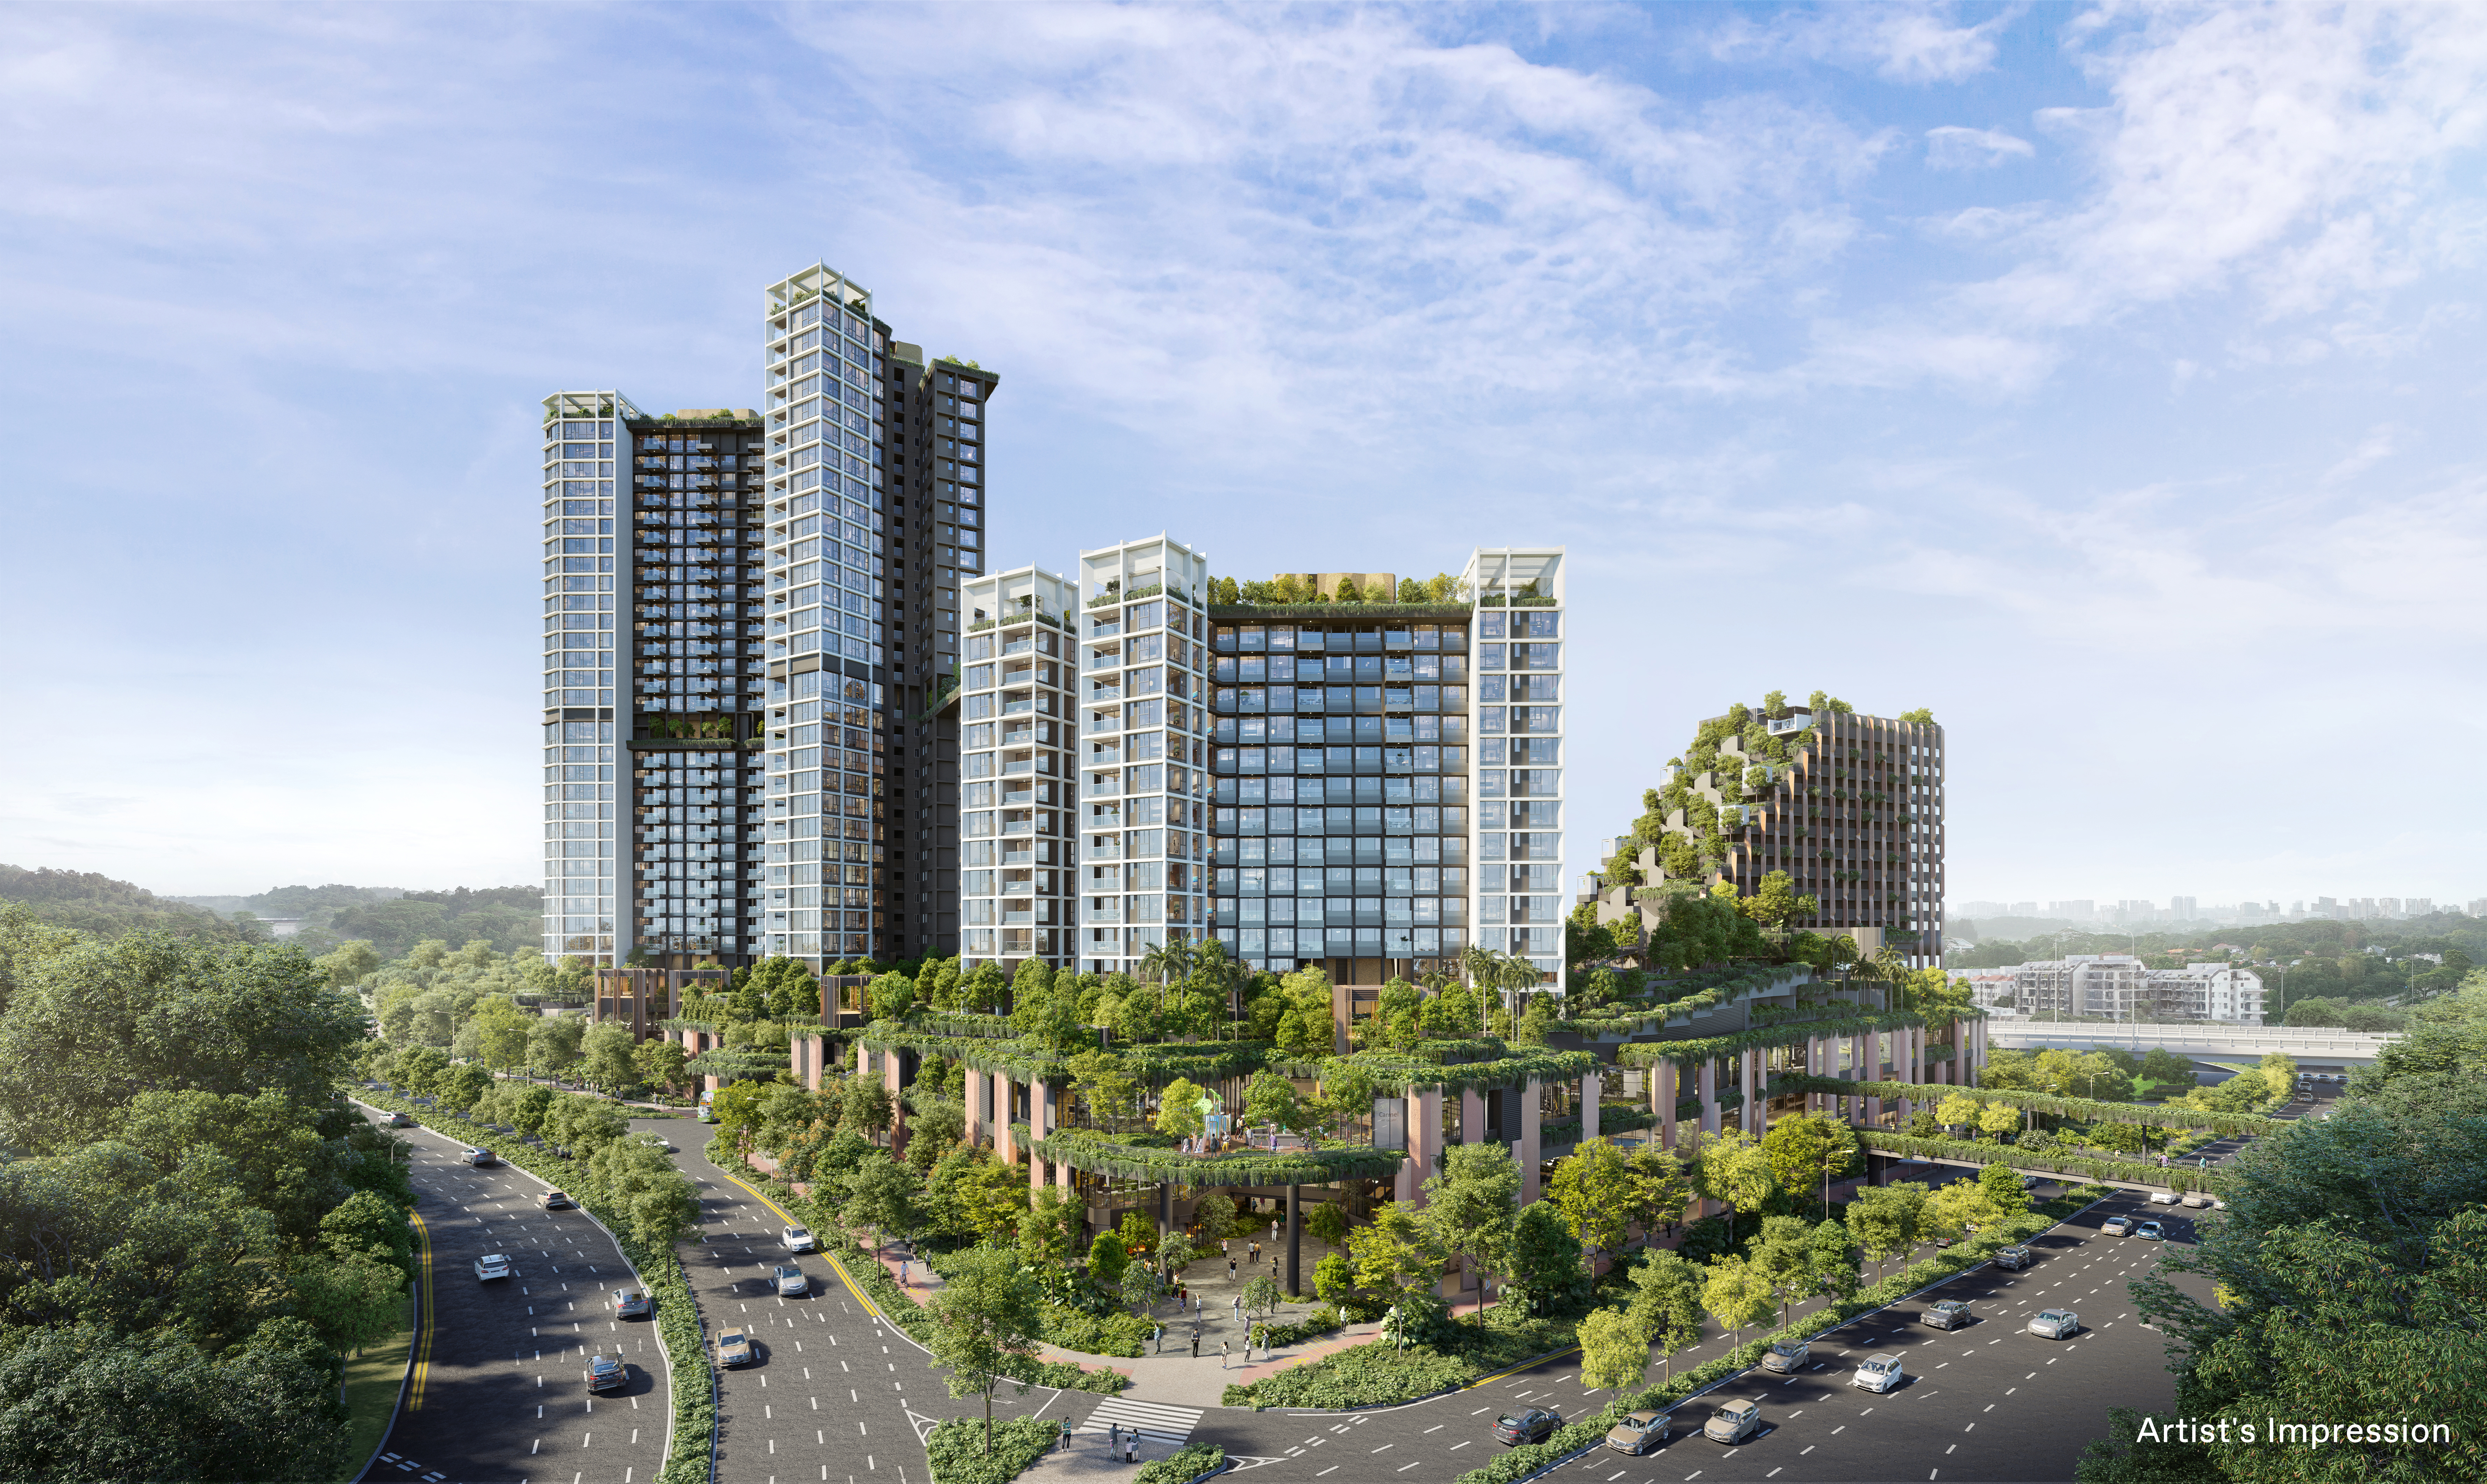 The only mixed-use integrated development with a transport hub situated in the heart of Bukit Timah and the foothills of the Bukit Timah Nature Reserve. The Reserve Residences is inspired by the verdant landscape of the neighbouring nature parks.